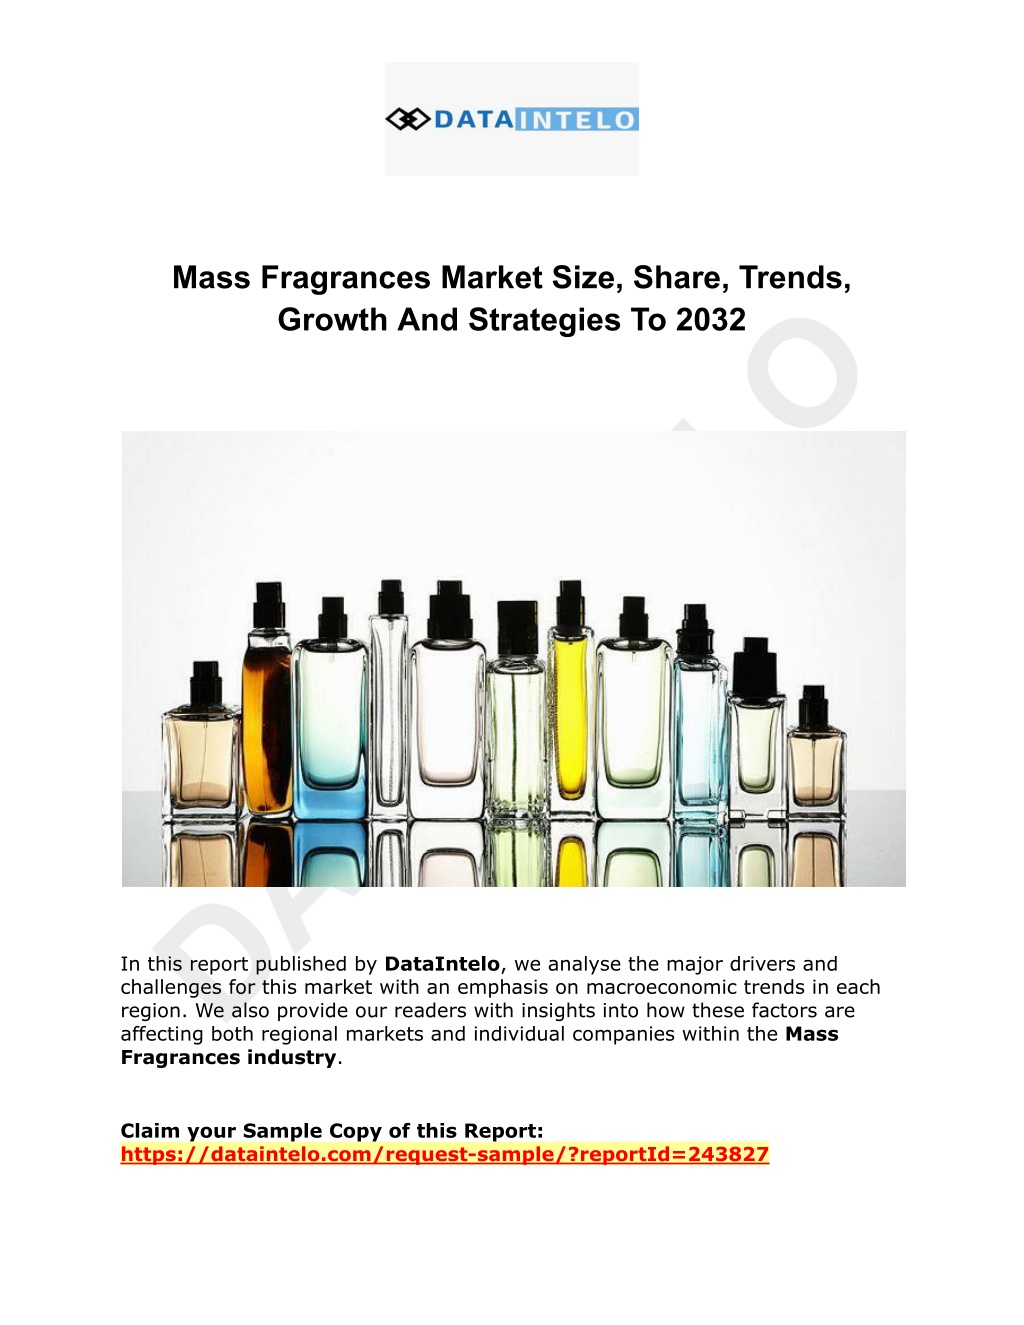 mass fragrances market size share trends growth l.w